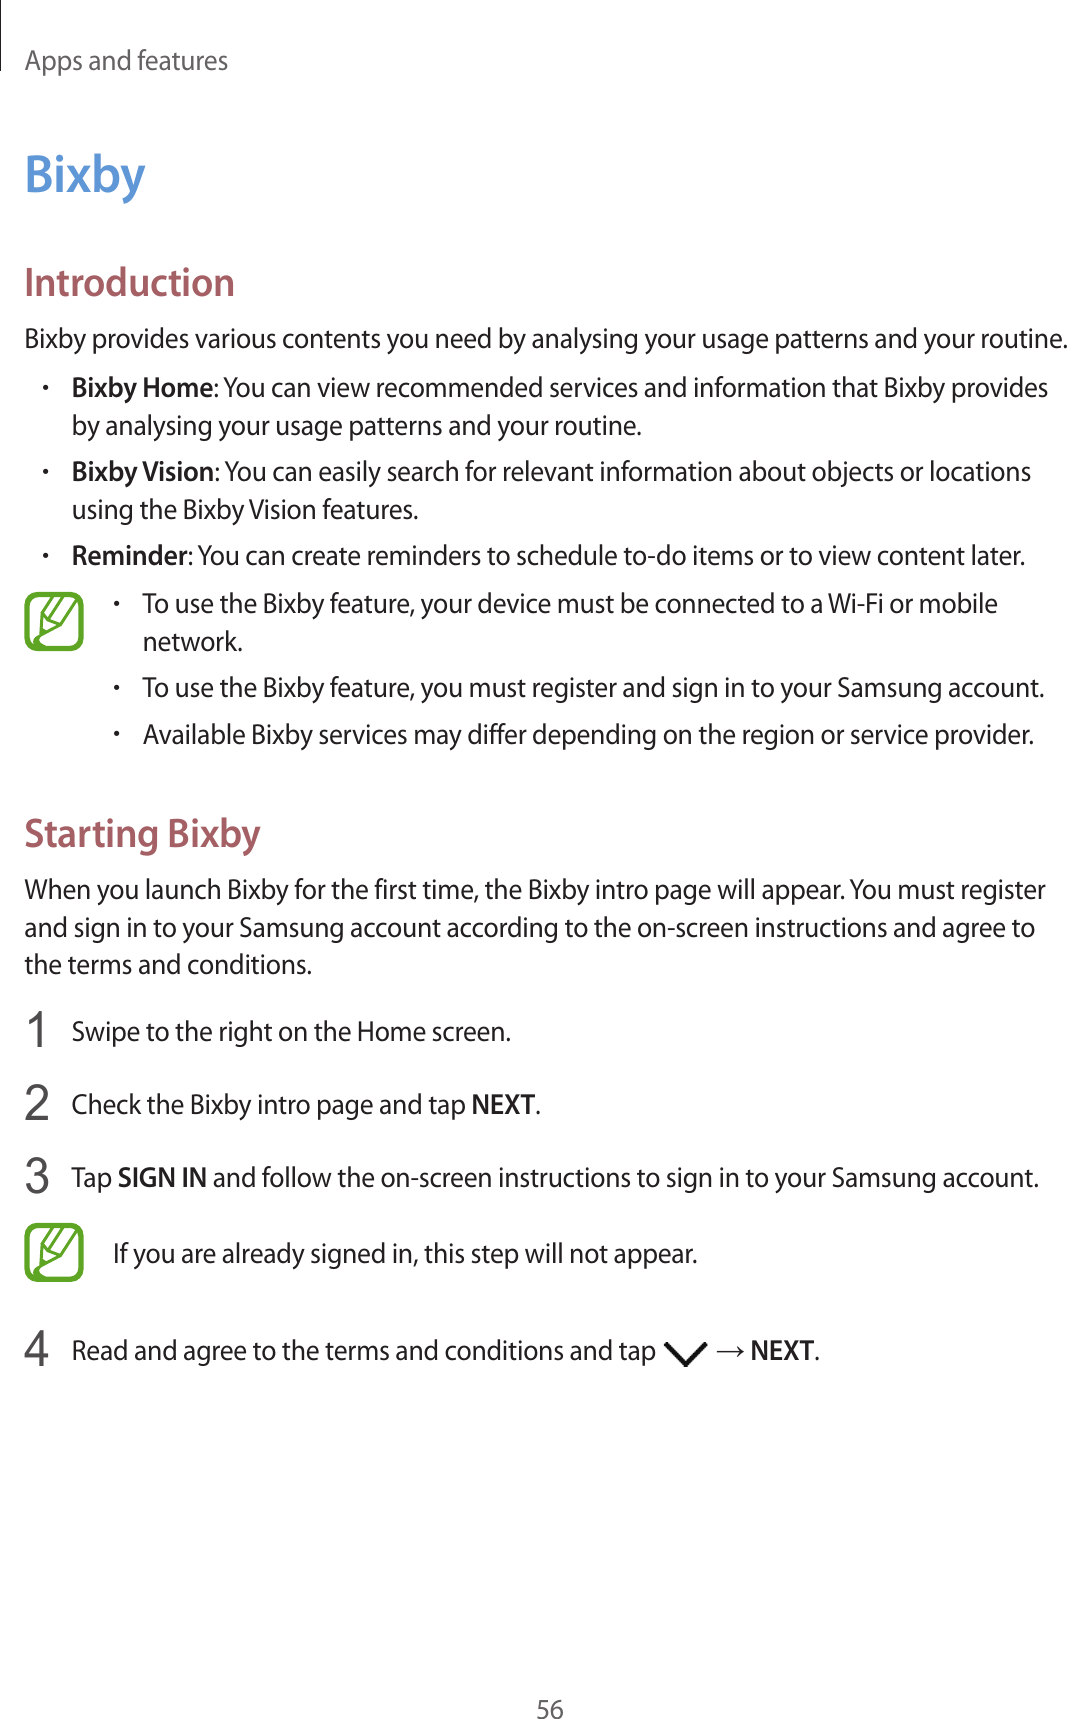 Apps and features56BixbyIntroductionBixby provides various contents you need by analysing your usage patterns and your routine.•Bixby Home: You can view recommended services and information that Bixby provides by analysing your usage patterns and your routine.•Bixby Vision: You can easily search for relevant information about objects or locations using the Bixby Vision features.•Reminder: You can create reminders to schedule to-do items or to view content later.•To use the Bixby feature, your device must be connected to a Wi-Fi or mobile network.•To use the Bixby feature, you must register and sign in to your Samsung account.•Available Bixby services may differ depending on the region or service provider.Starting BixbyWhen you launch Bixby for the first time, the Bixby intro page will appear. You must register and sign in to your Samsung account according to the on-screen instructions and agree to the terms and conditions.1  Swipe to the right on the Home screen.2  Check the Bixby intro page and tap NEXT.3  Tap SIGN IN and follow the on-screen instructions to sign in to your Samsung account.If you are already signed in, this step will not appear.4  Read and agree to the terms and conditions and tap   → NEXT.